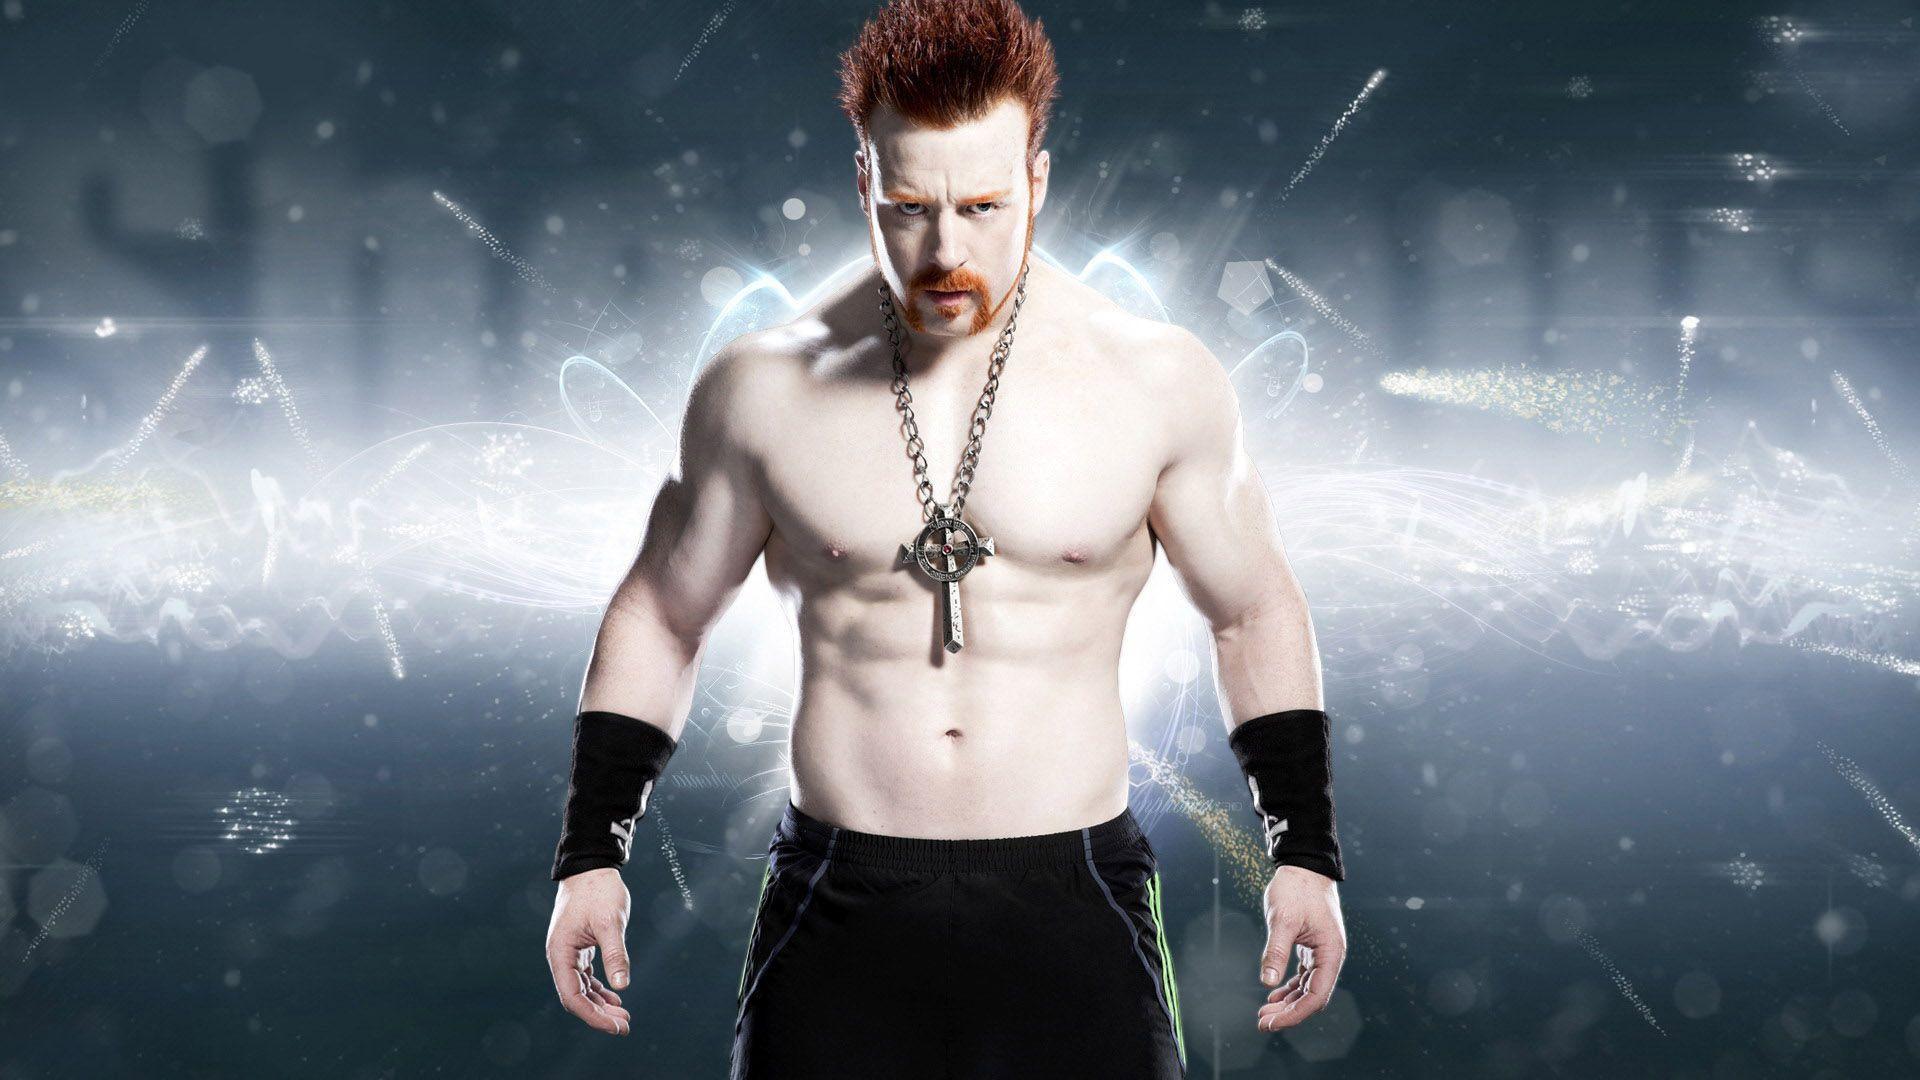 Sheamus Wallpapers Download Wwe Great White Hd Wallpapers